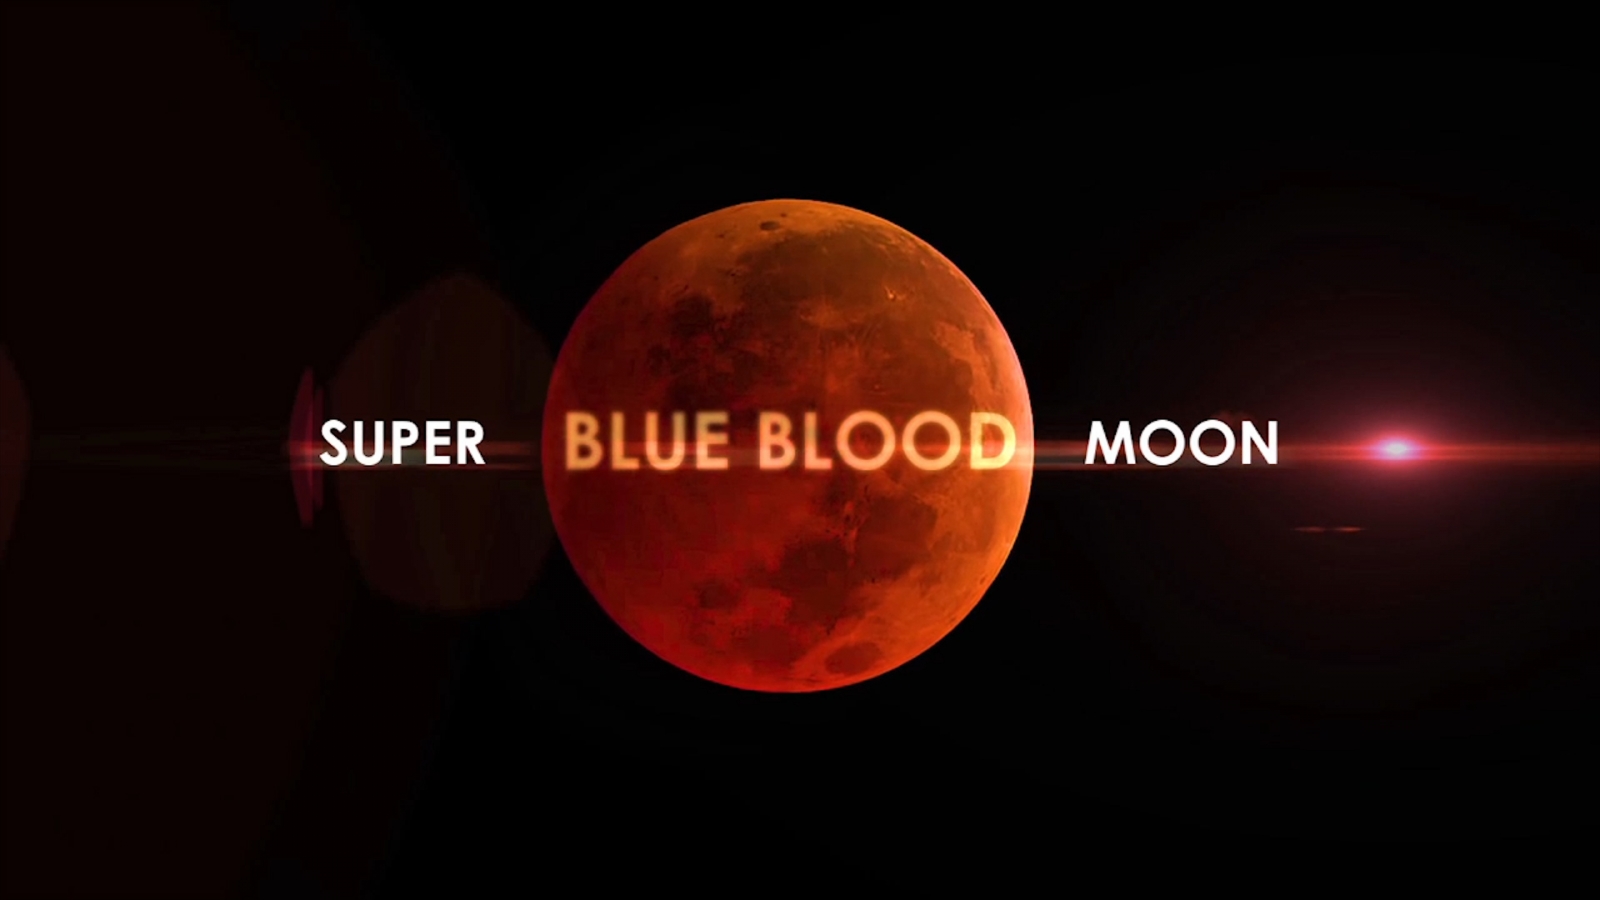 Super blue blood moon Bible prophecy predicts end times coming